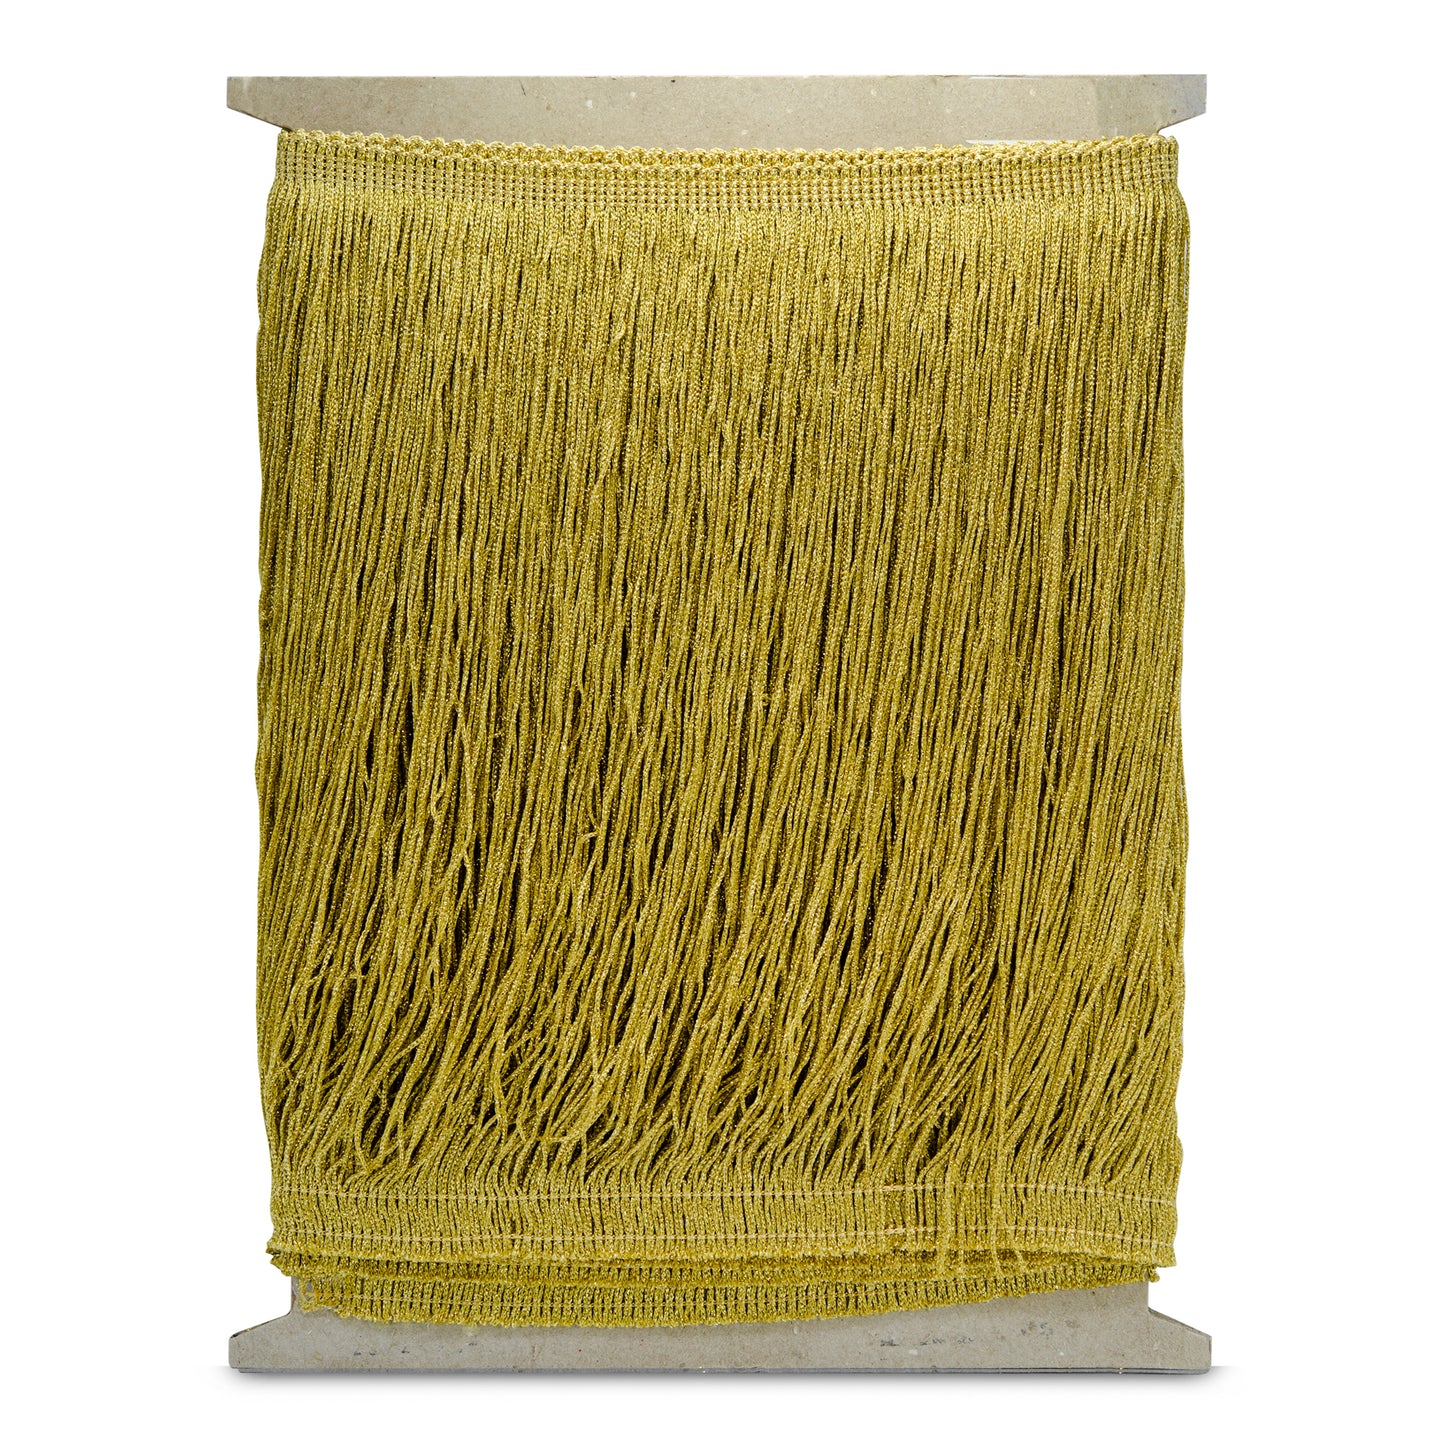 18" Metallic Chainette Fringe Trim (Sold by the Yard)